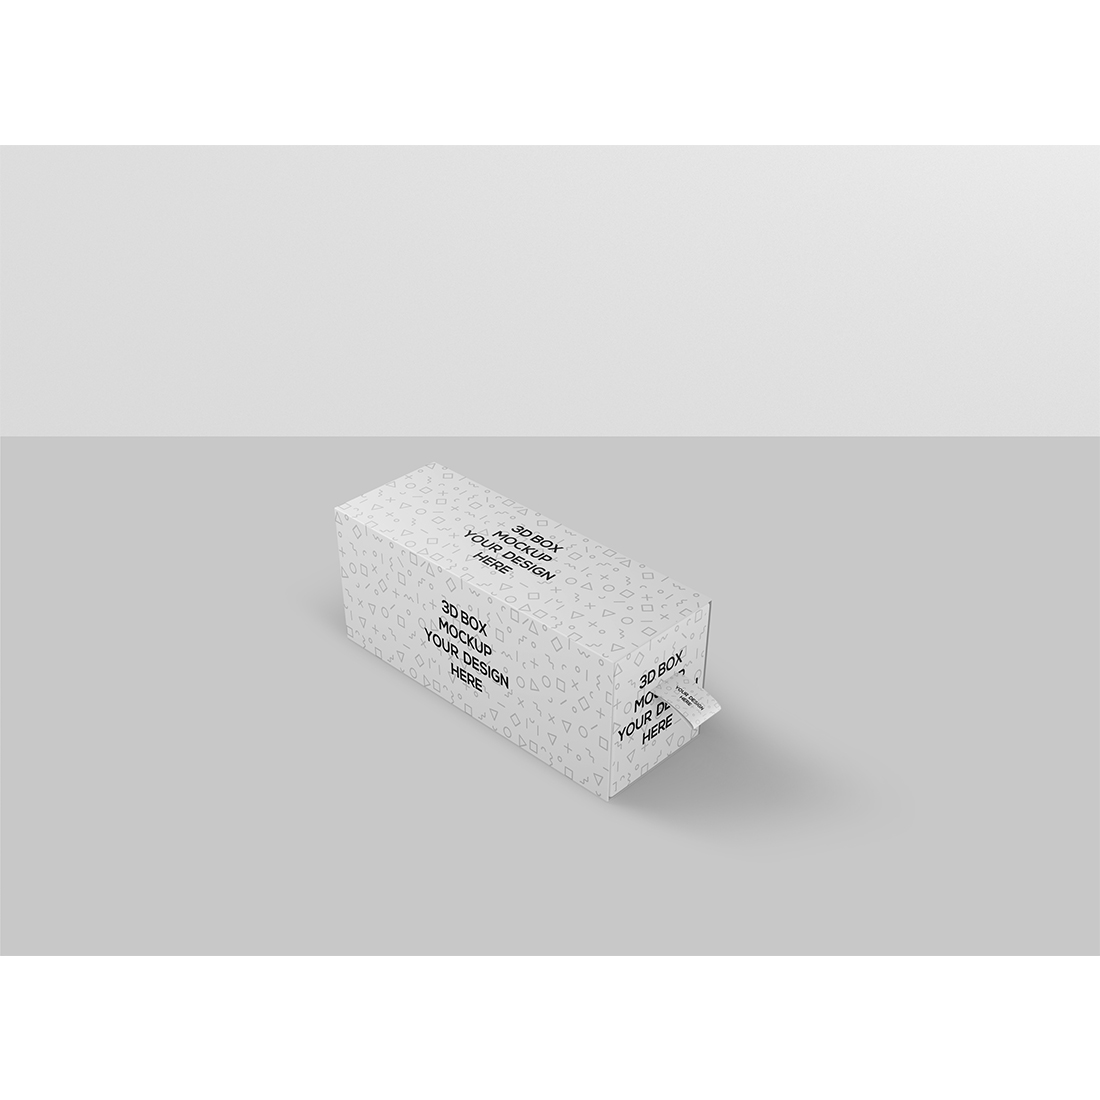 Drawer Box Packaging Mockup cover image.